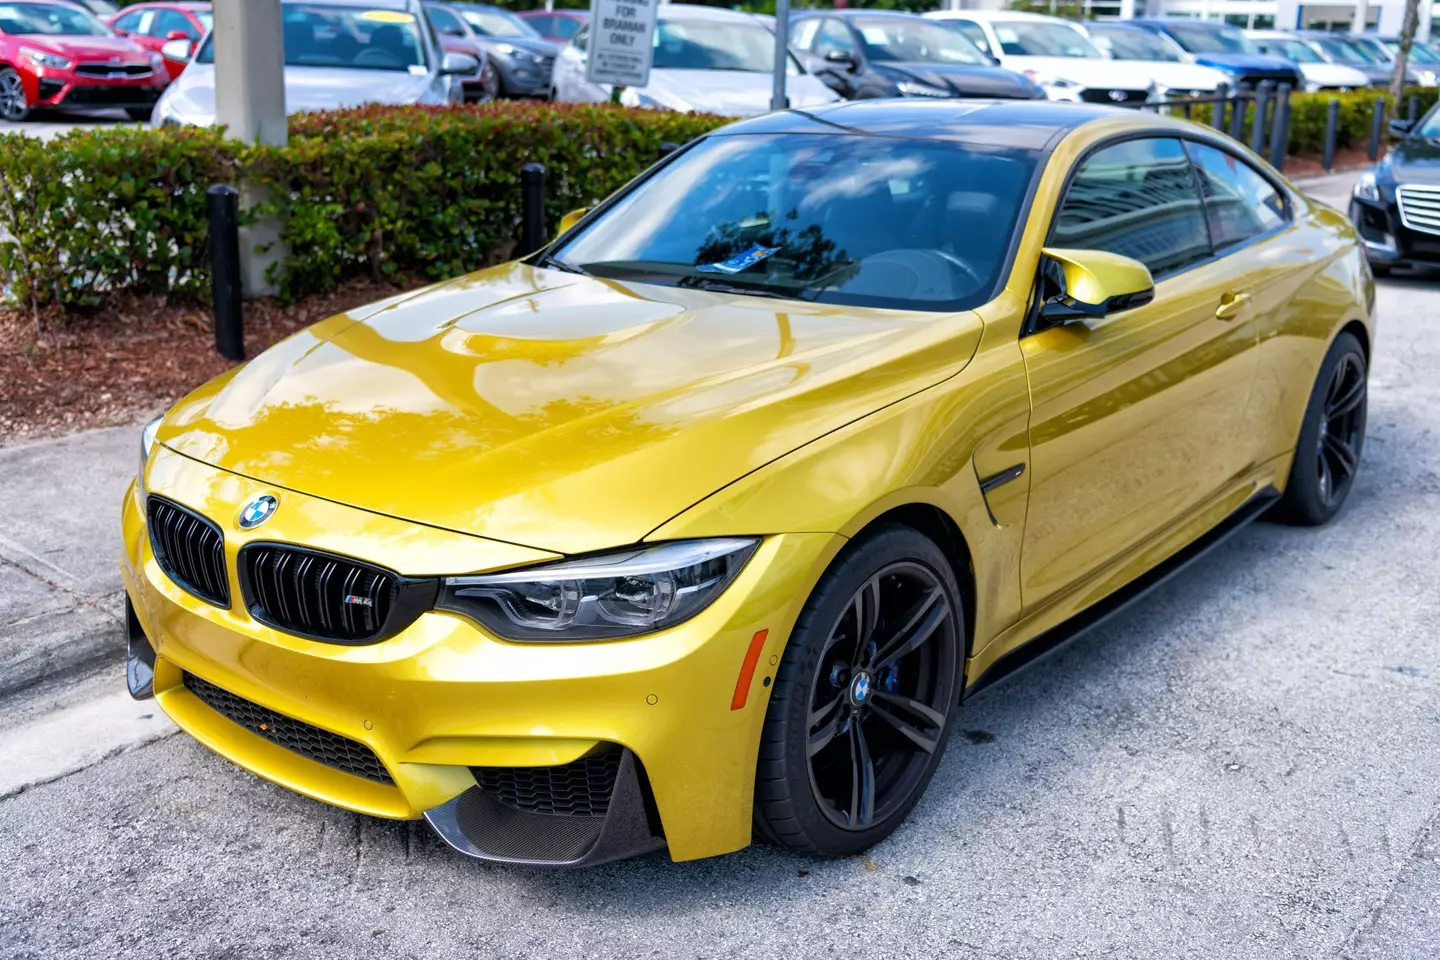 The plate was last seen on a BMW M4.